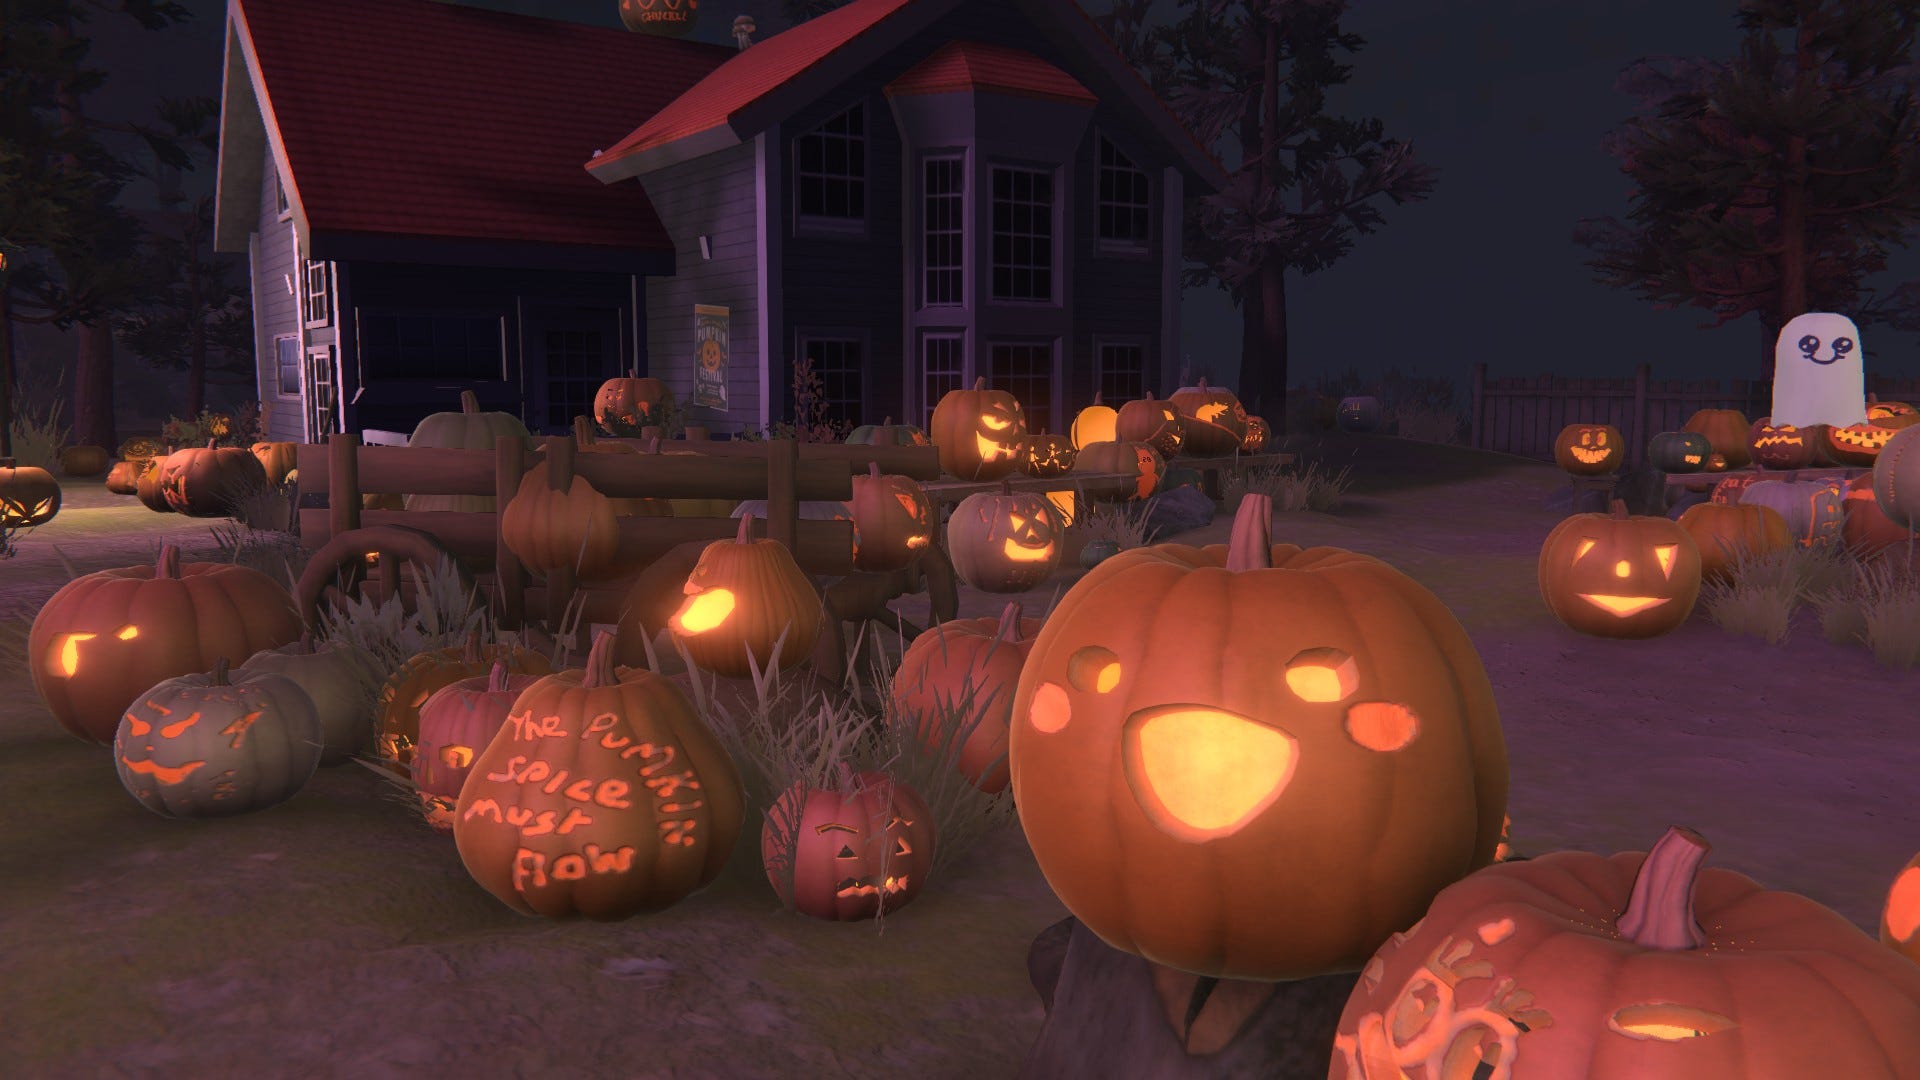 Carve pumpkins for a festival in this free game | Rock Paper Shotgun